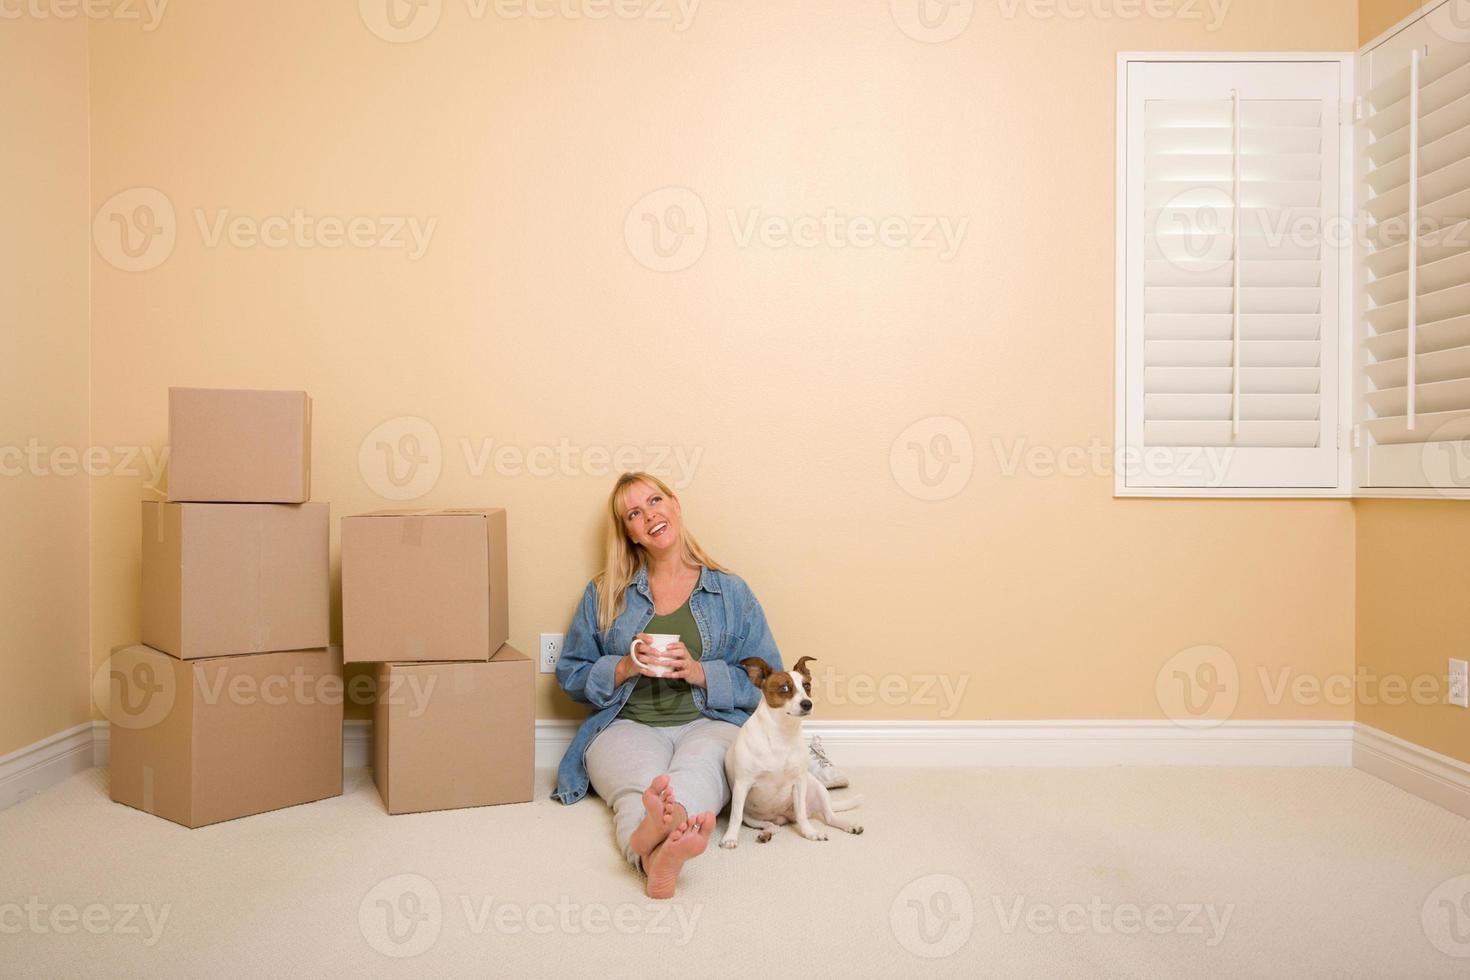 Relaxing Woman and Dog Next to Boxes on Floor photo